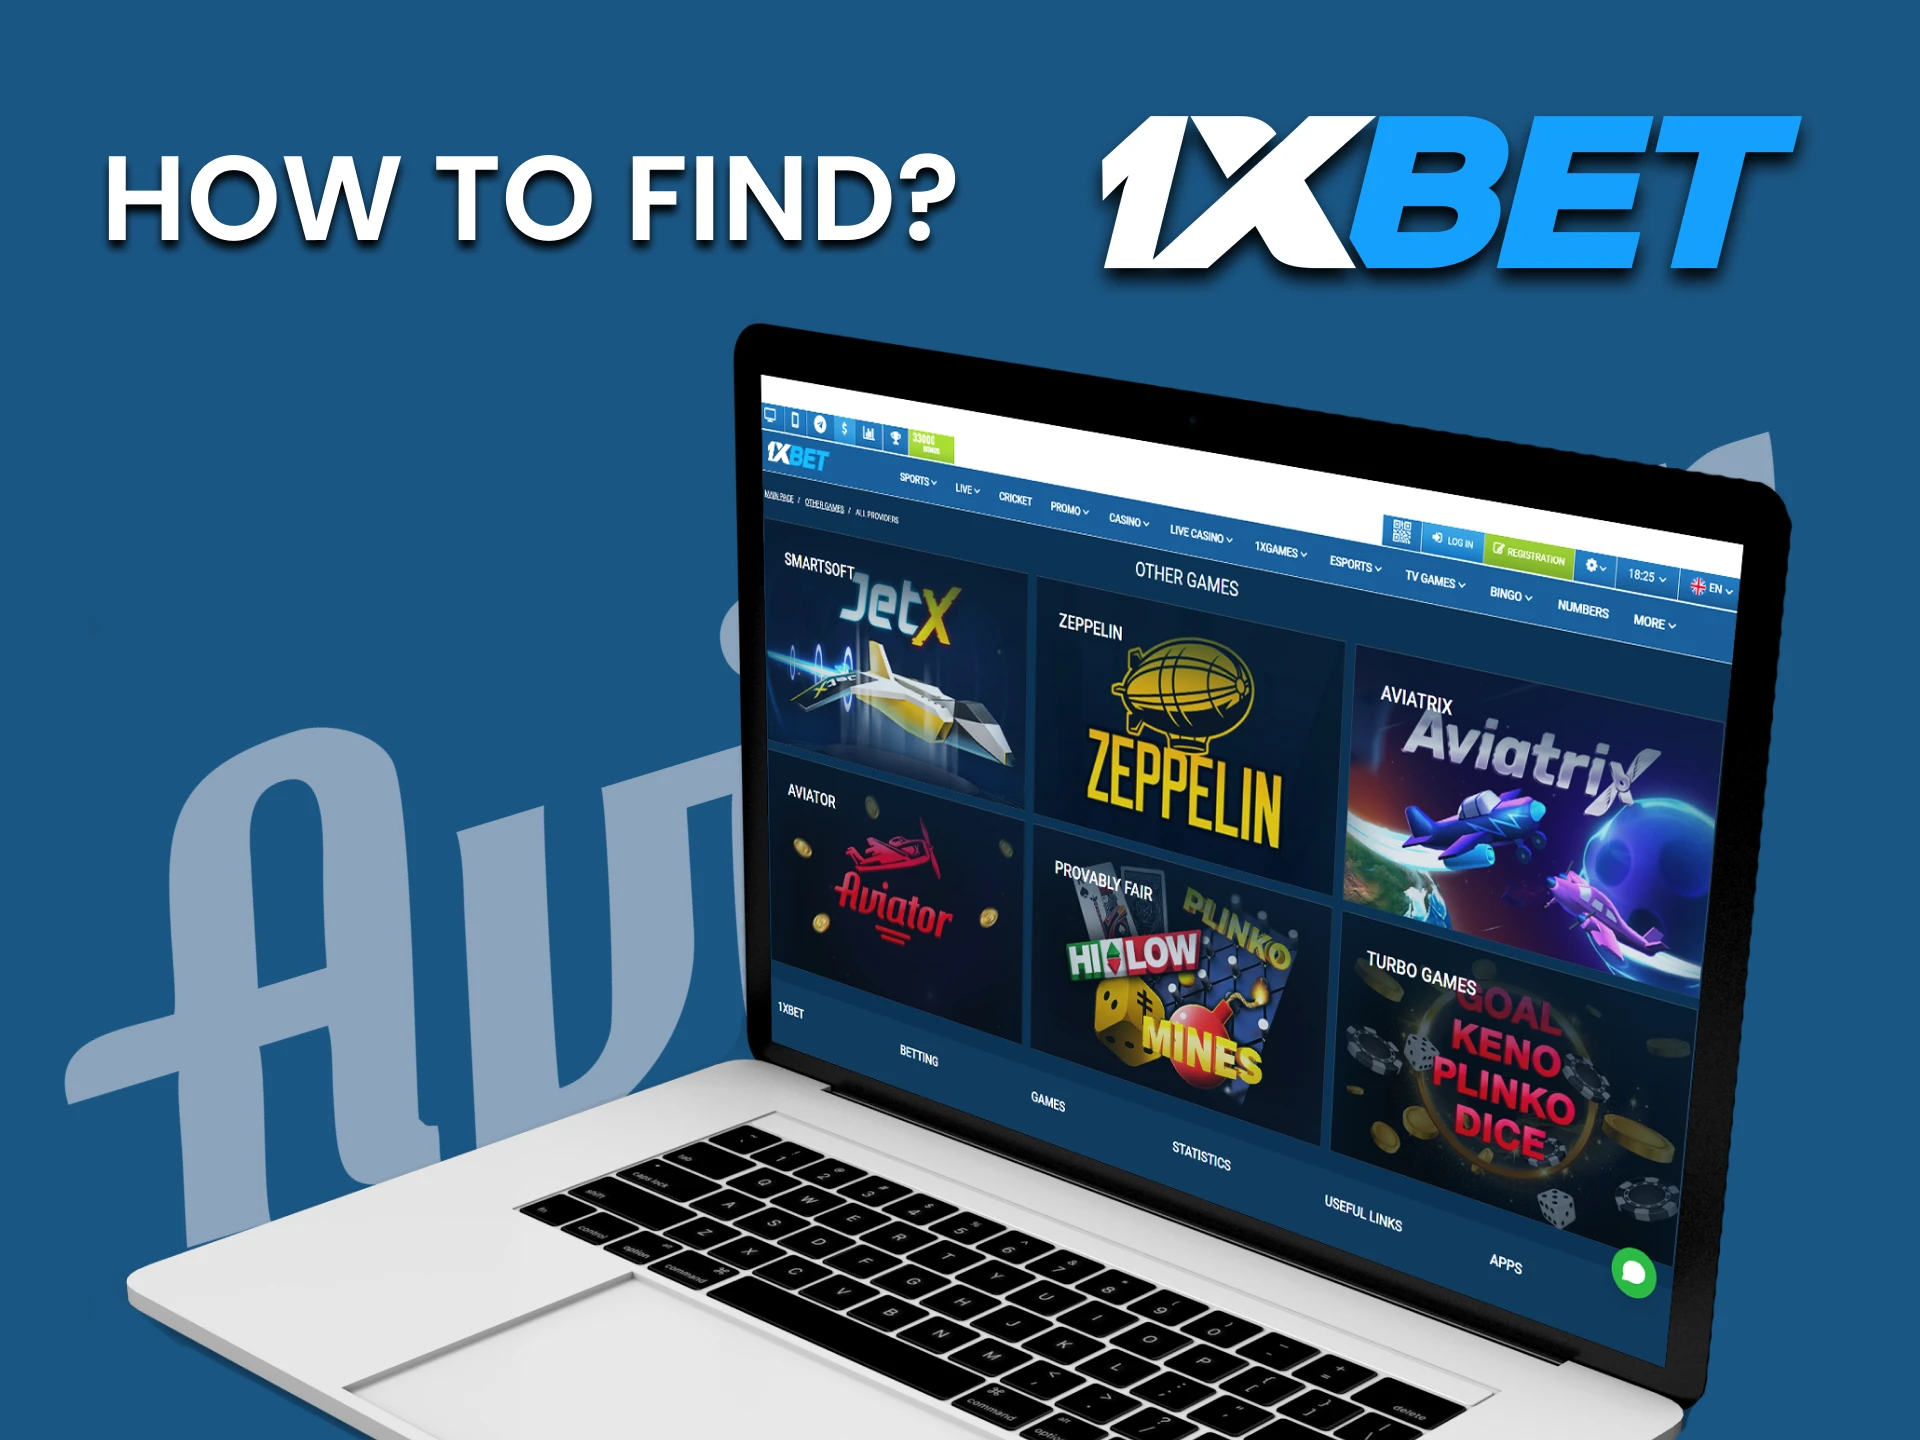 You can choose a demo version of the Aviator game in the crash section on 1xbet.